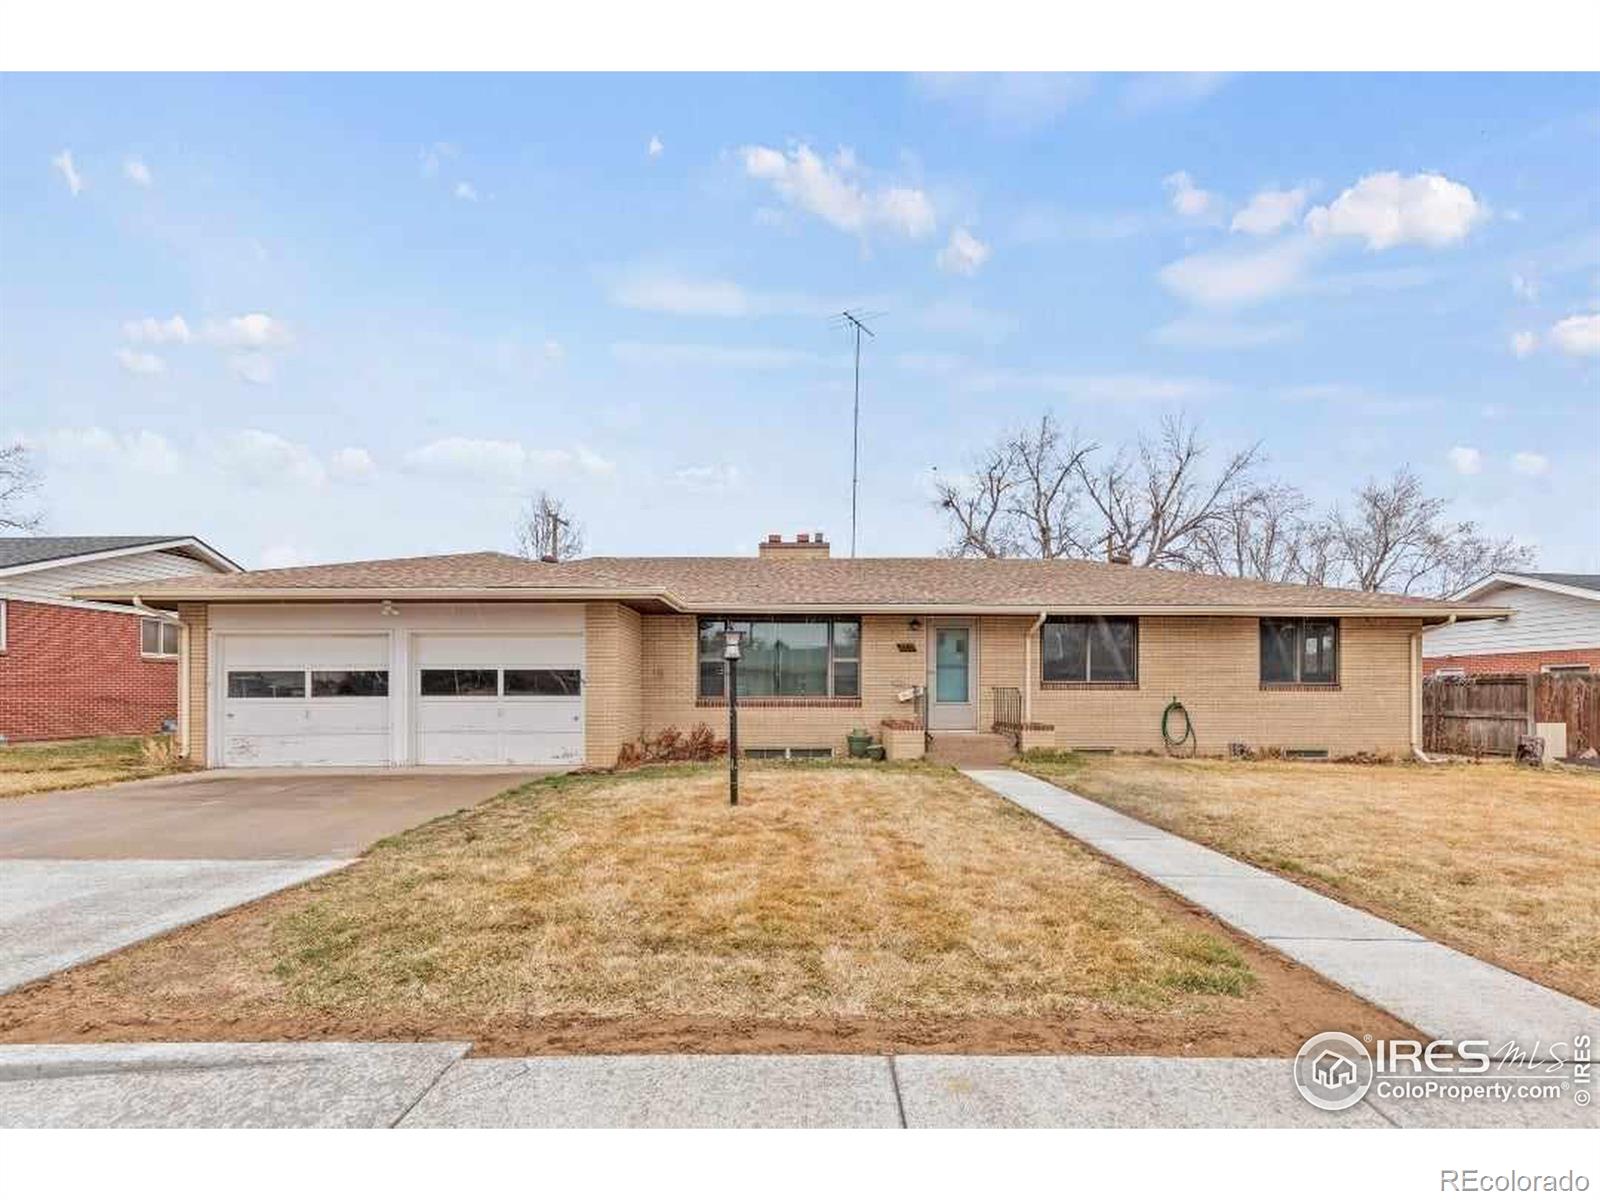 Report Image for 2223  12th St Rd,Greeley, Colorado